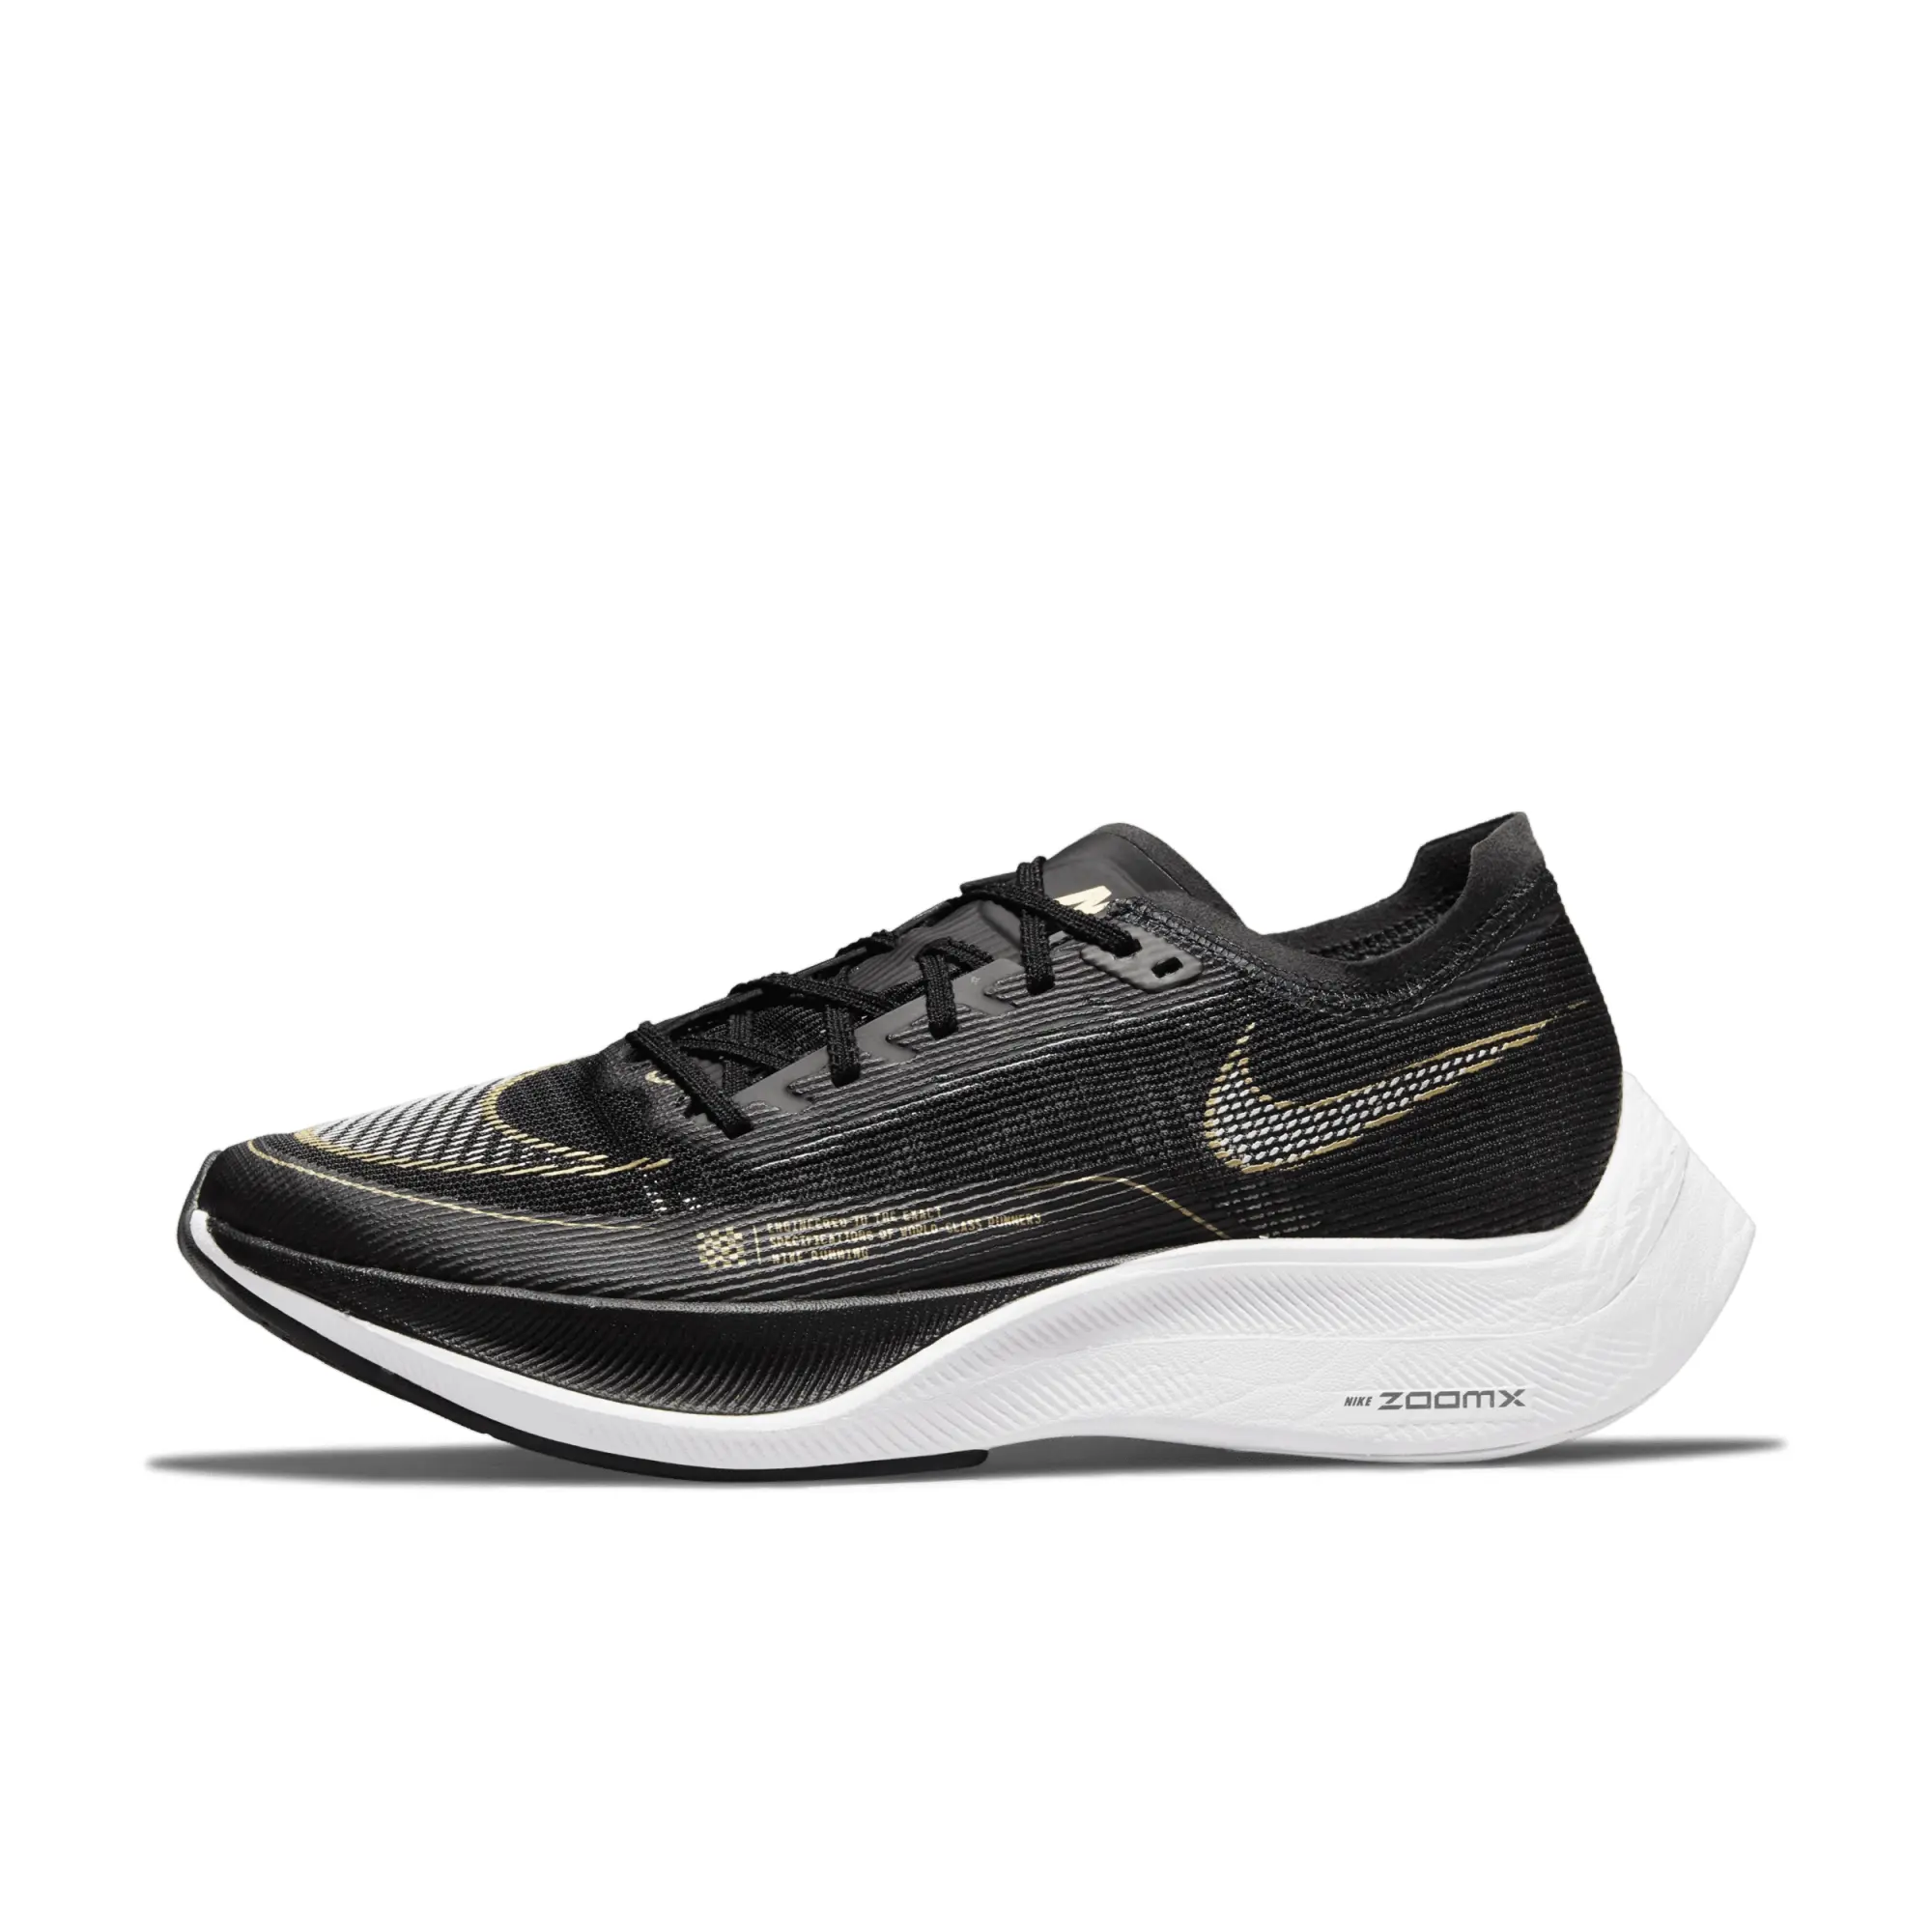 Nike ZoomX Vaporfly Next% 2 Womens Black Metallic Gold Coin Shoes